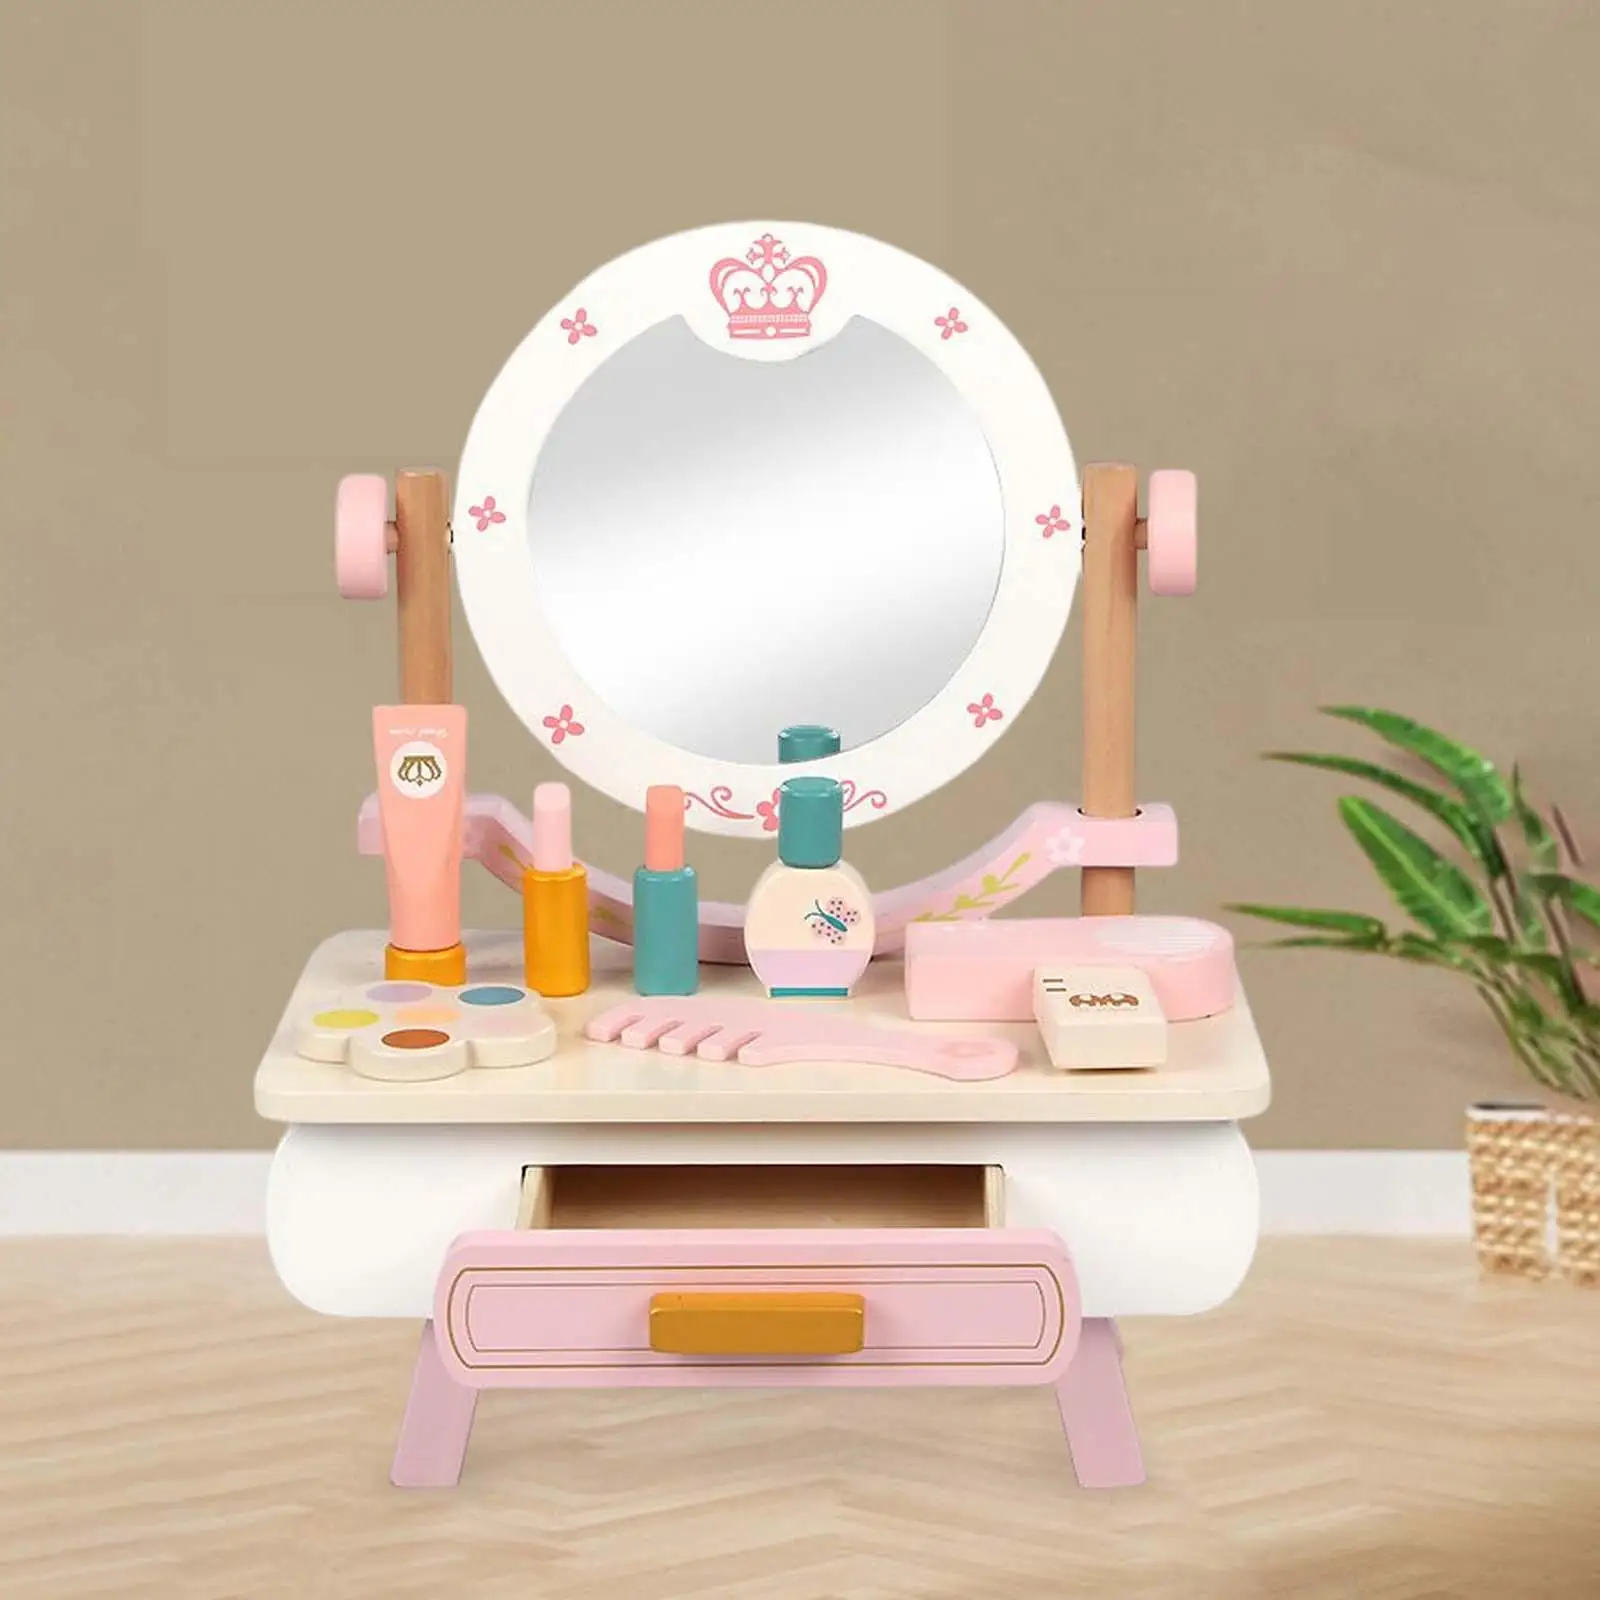 Kids Simulation Makeup Table Toy Education Playset for Birthday Gifts